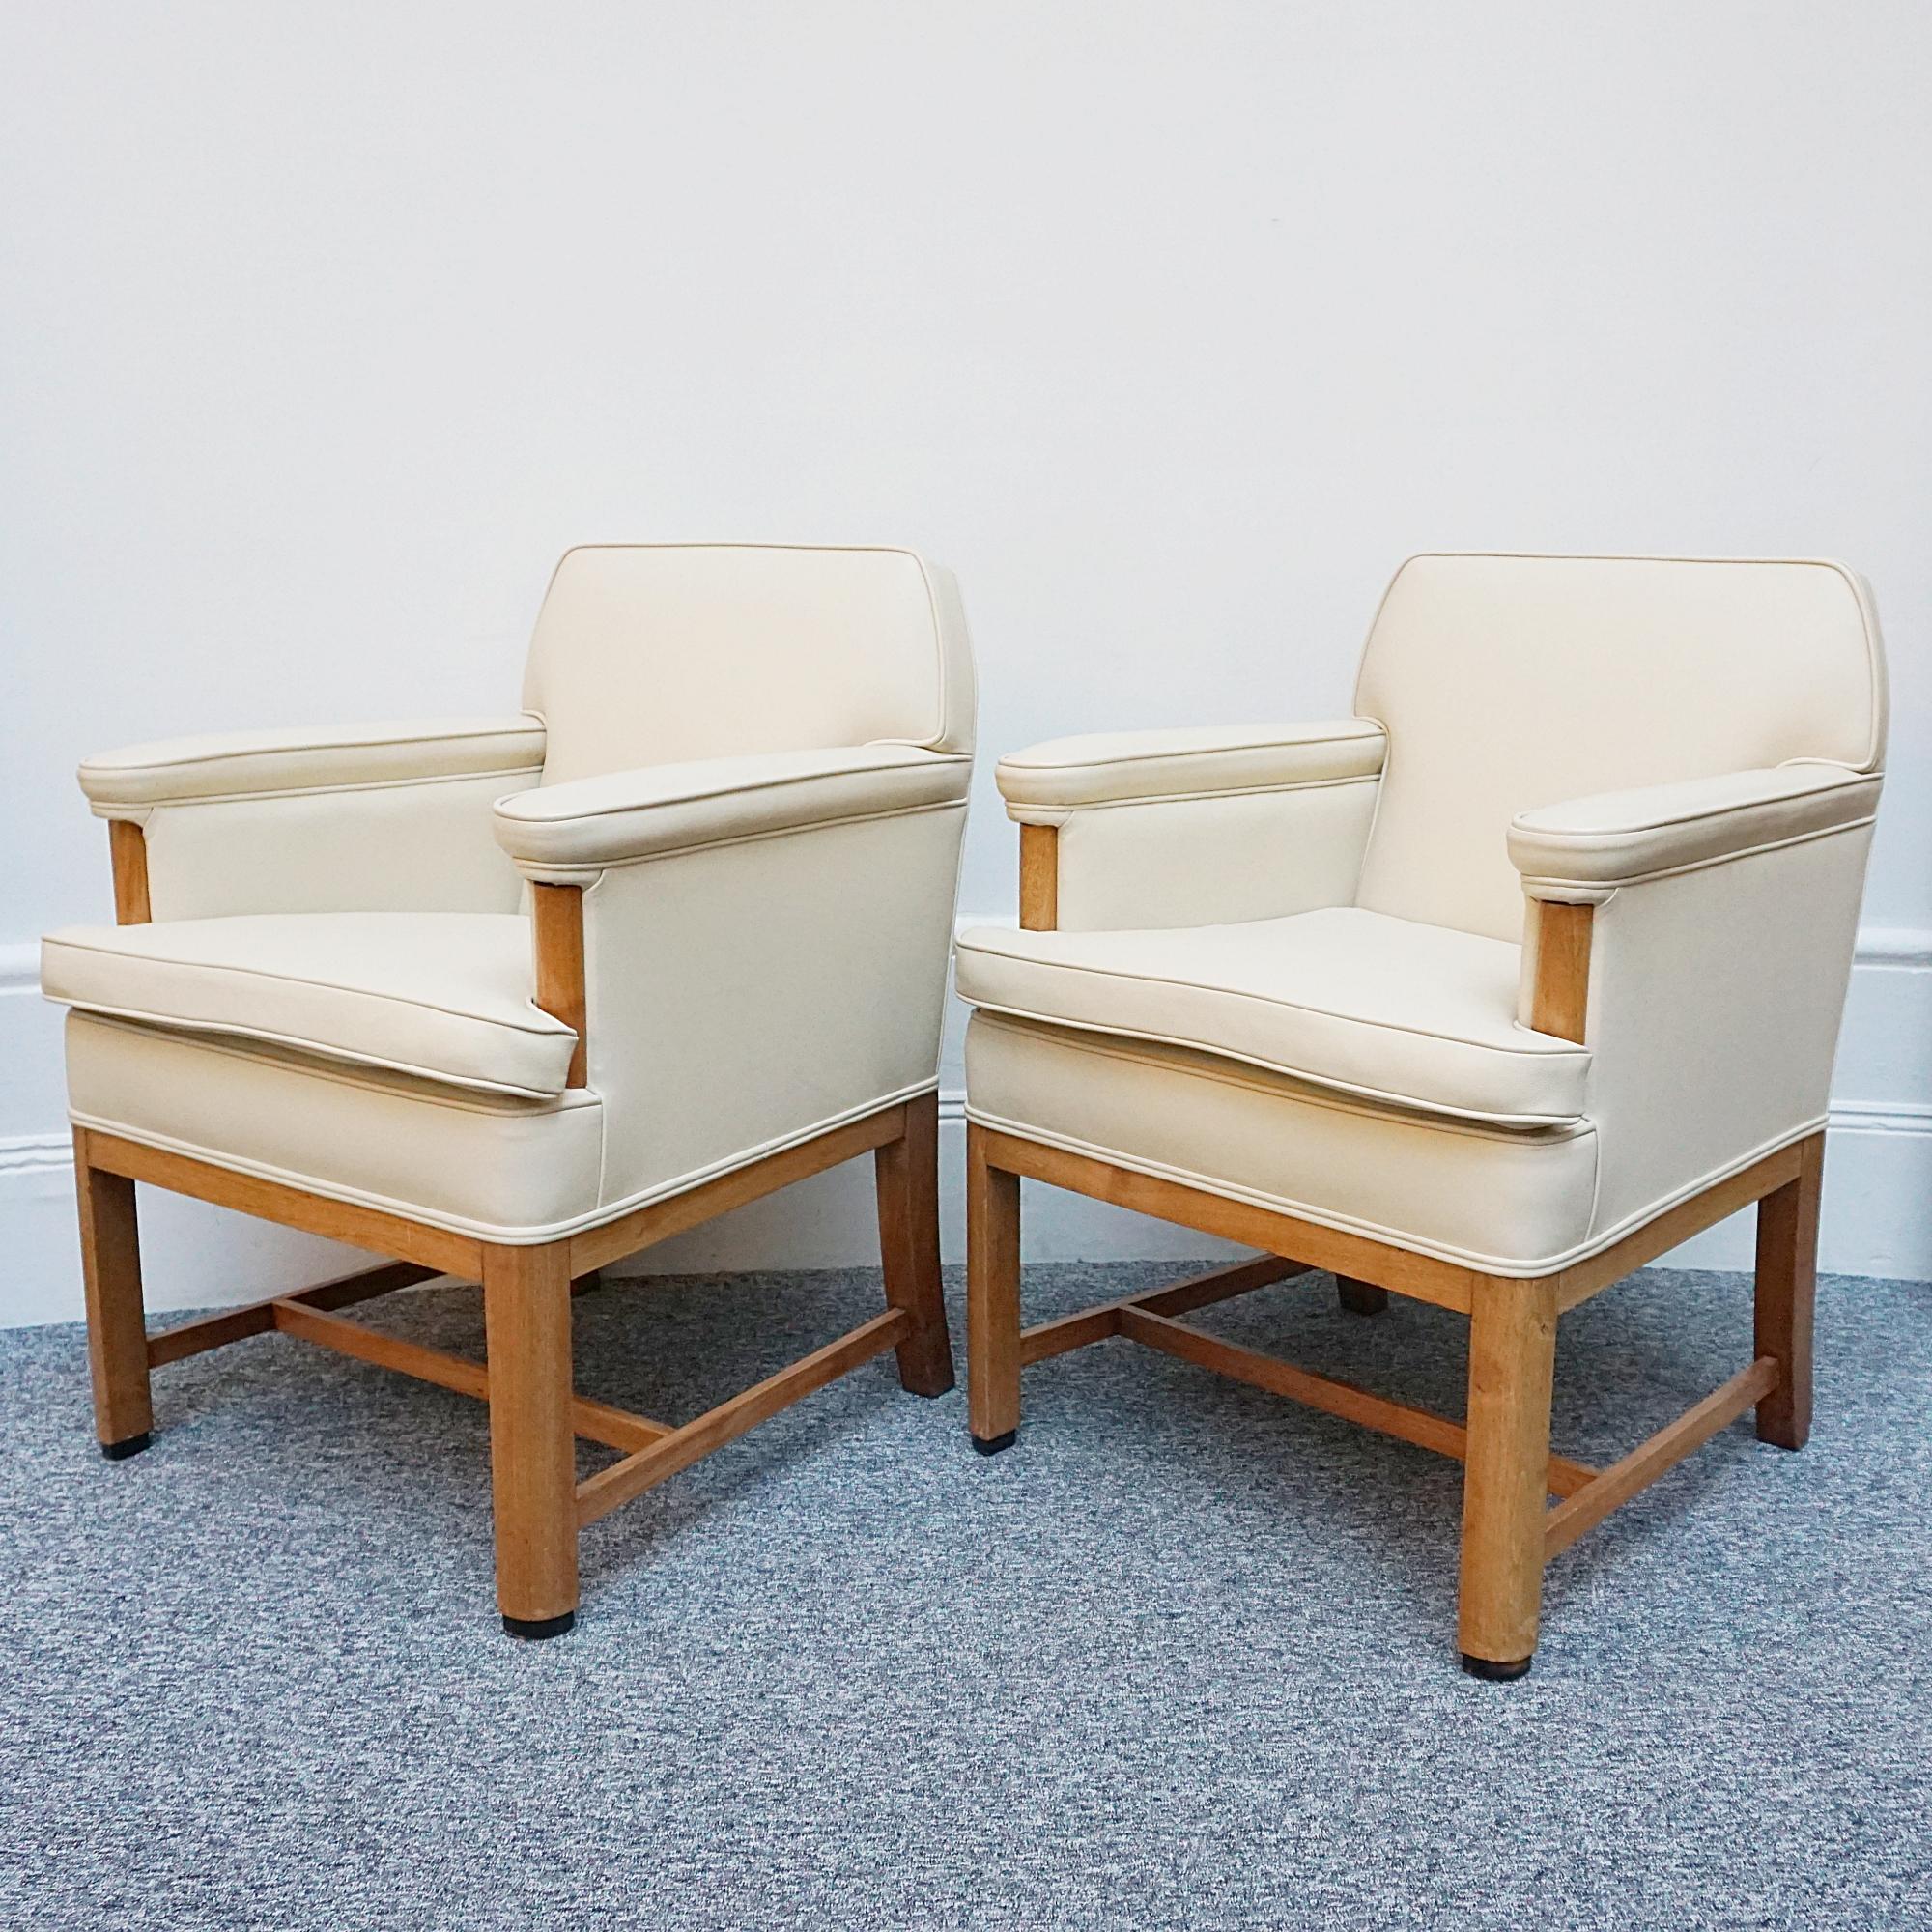 Early 20th Century Original Pair of Art Deco Bankers Armchairs English Circa 1920